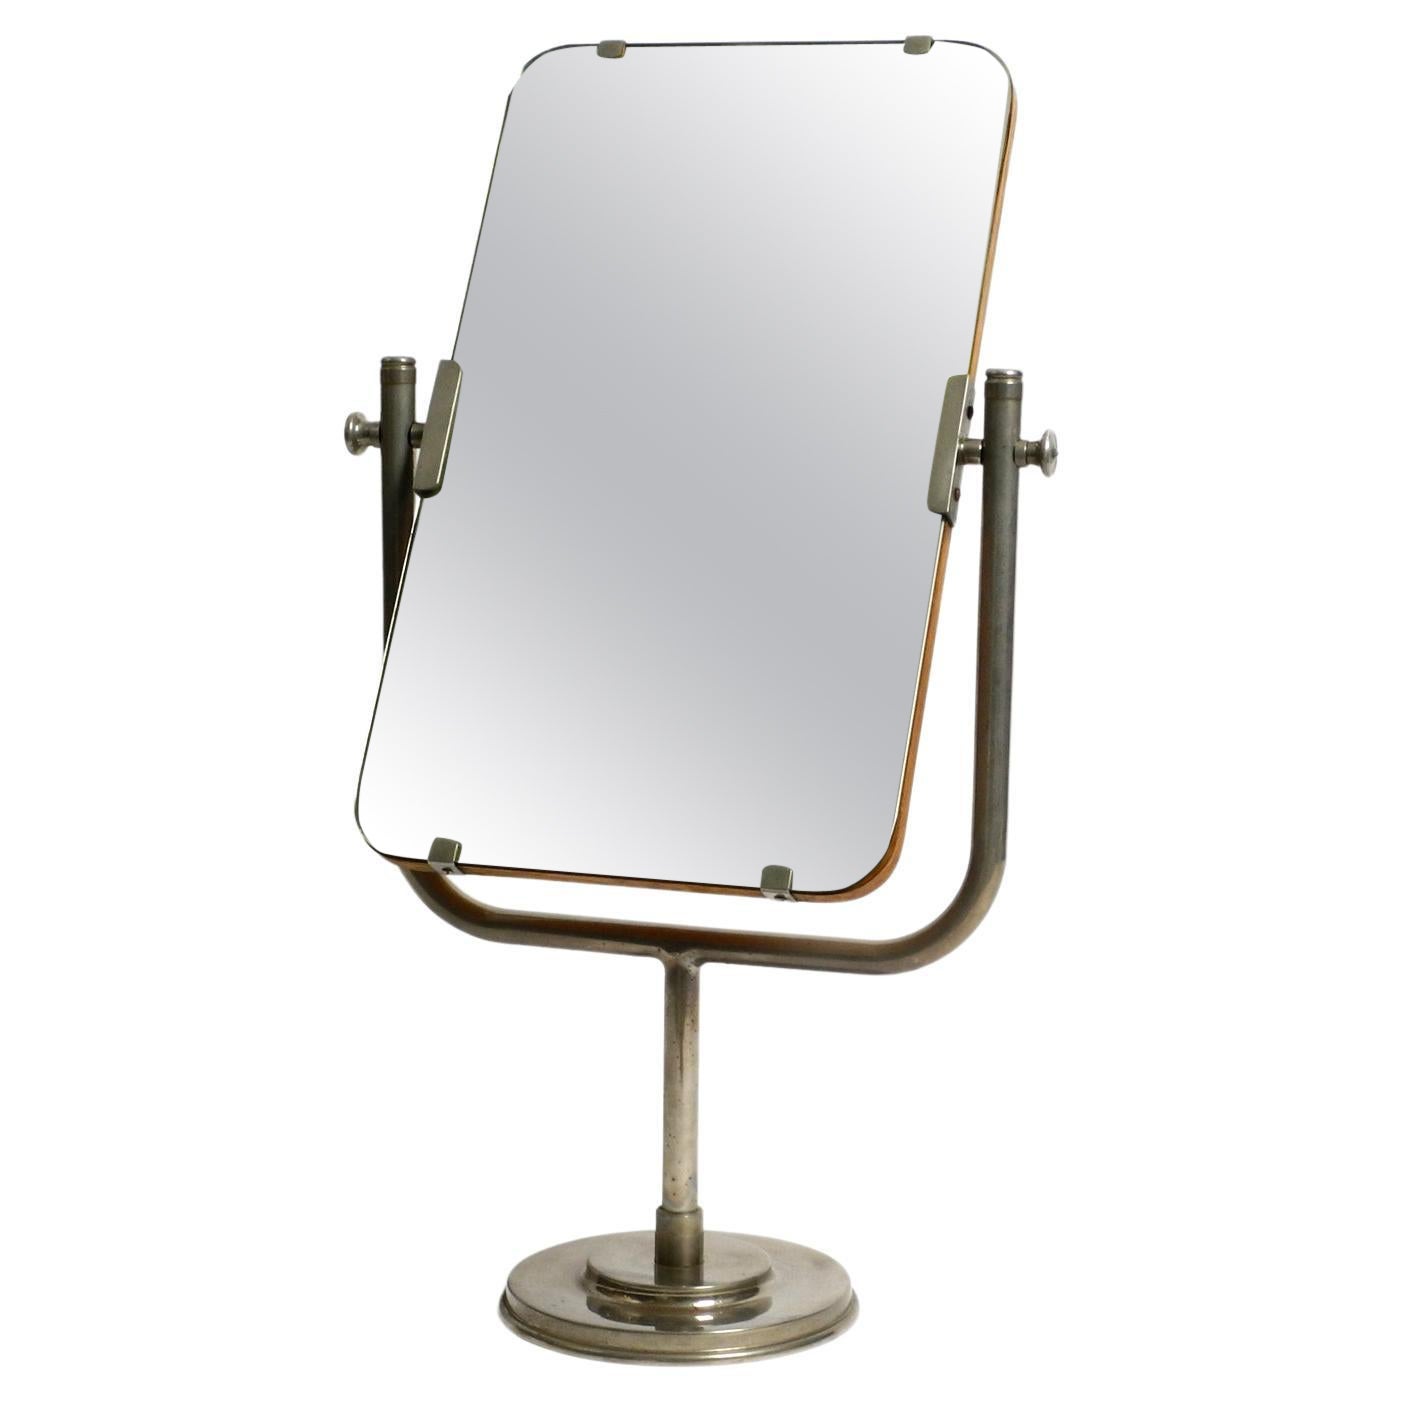 Huge 30s Table Mirror with Nickel-Plated Metal Frame and Original Mirror Glass